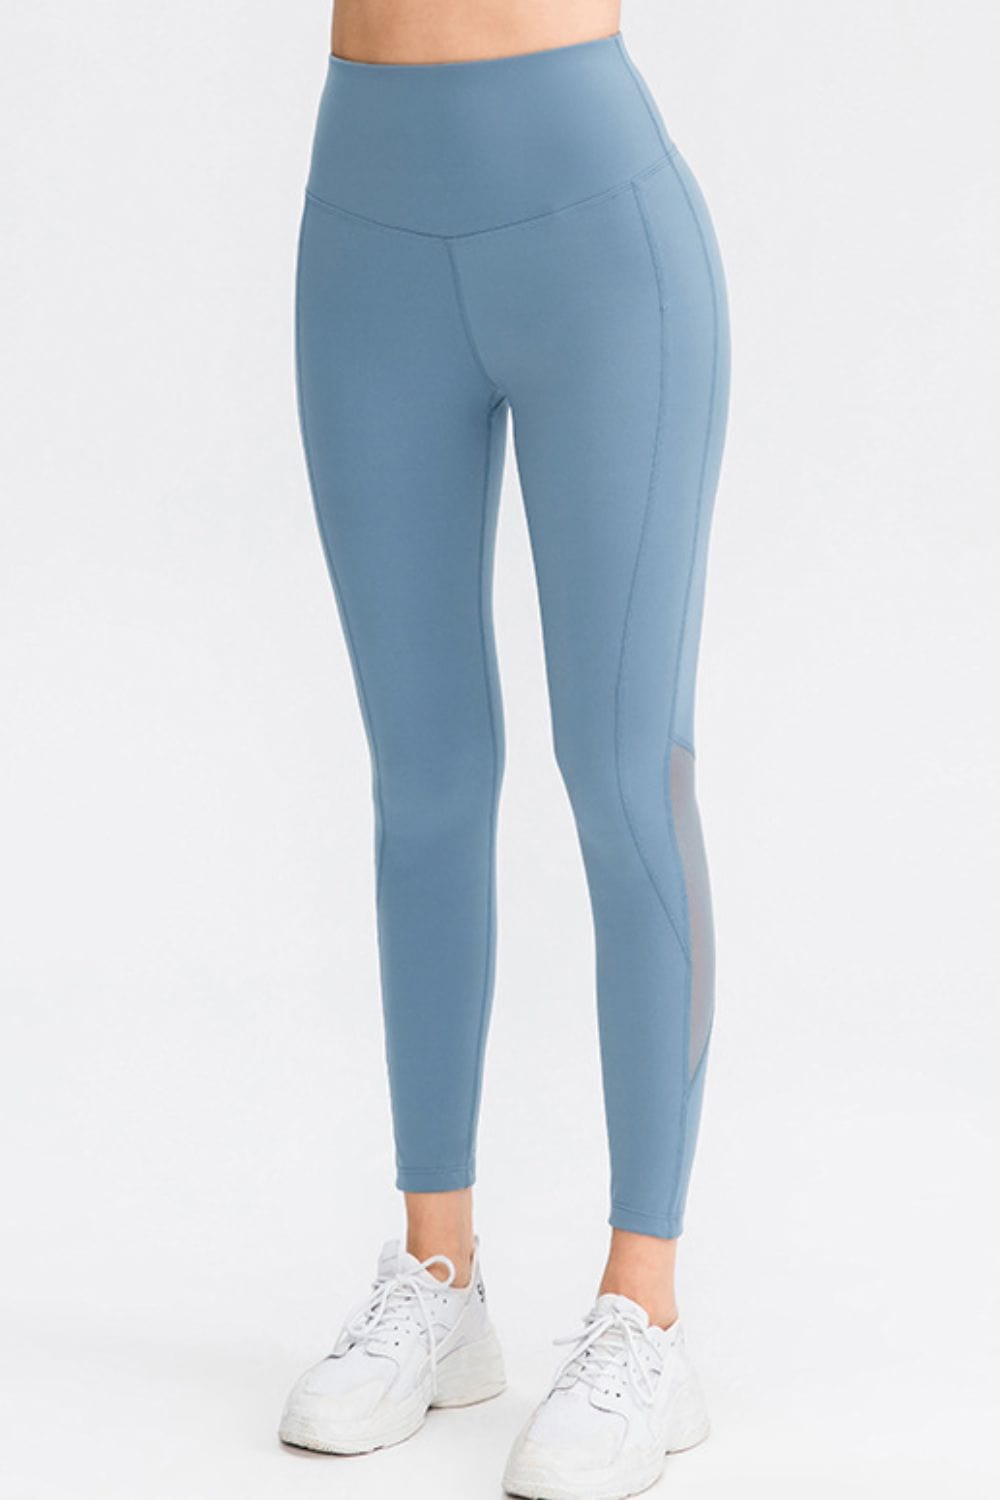 Wide Waistband Slim Fit Long Sports Pants - Runway Frenzy 